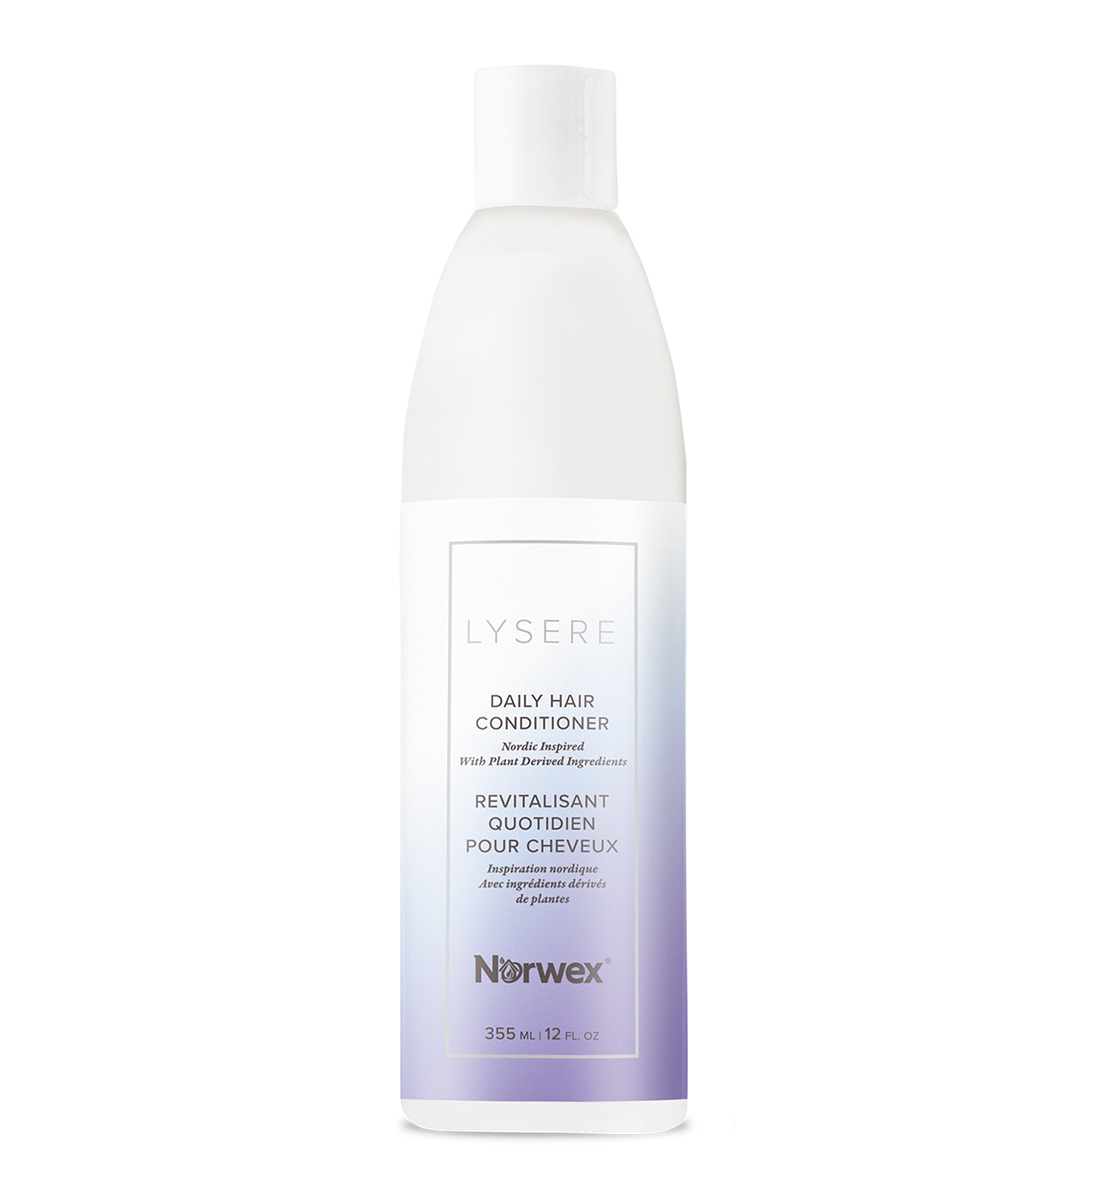 Lysere Daily Hair Conditioner